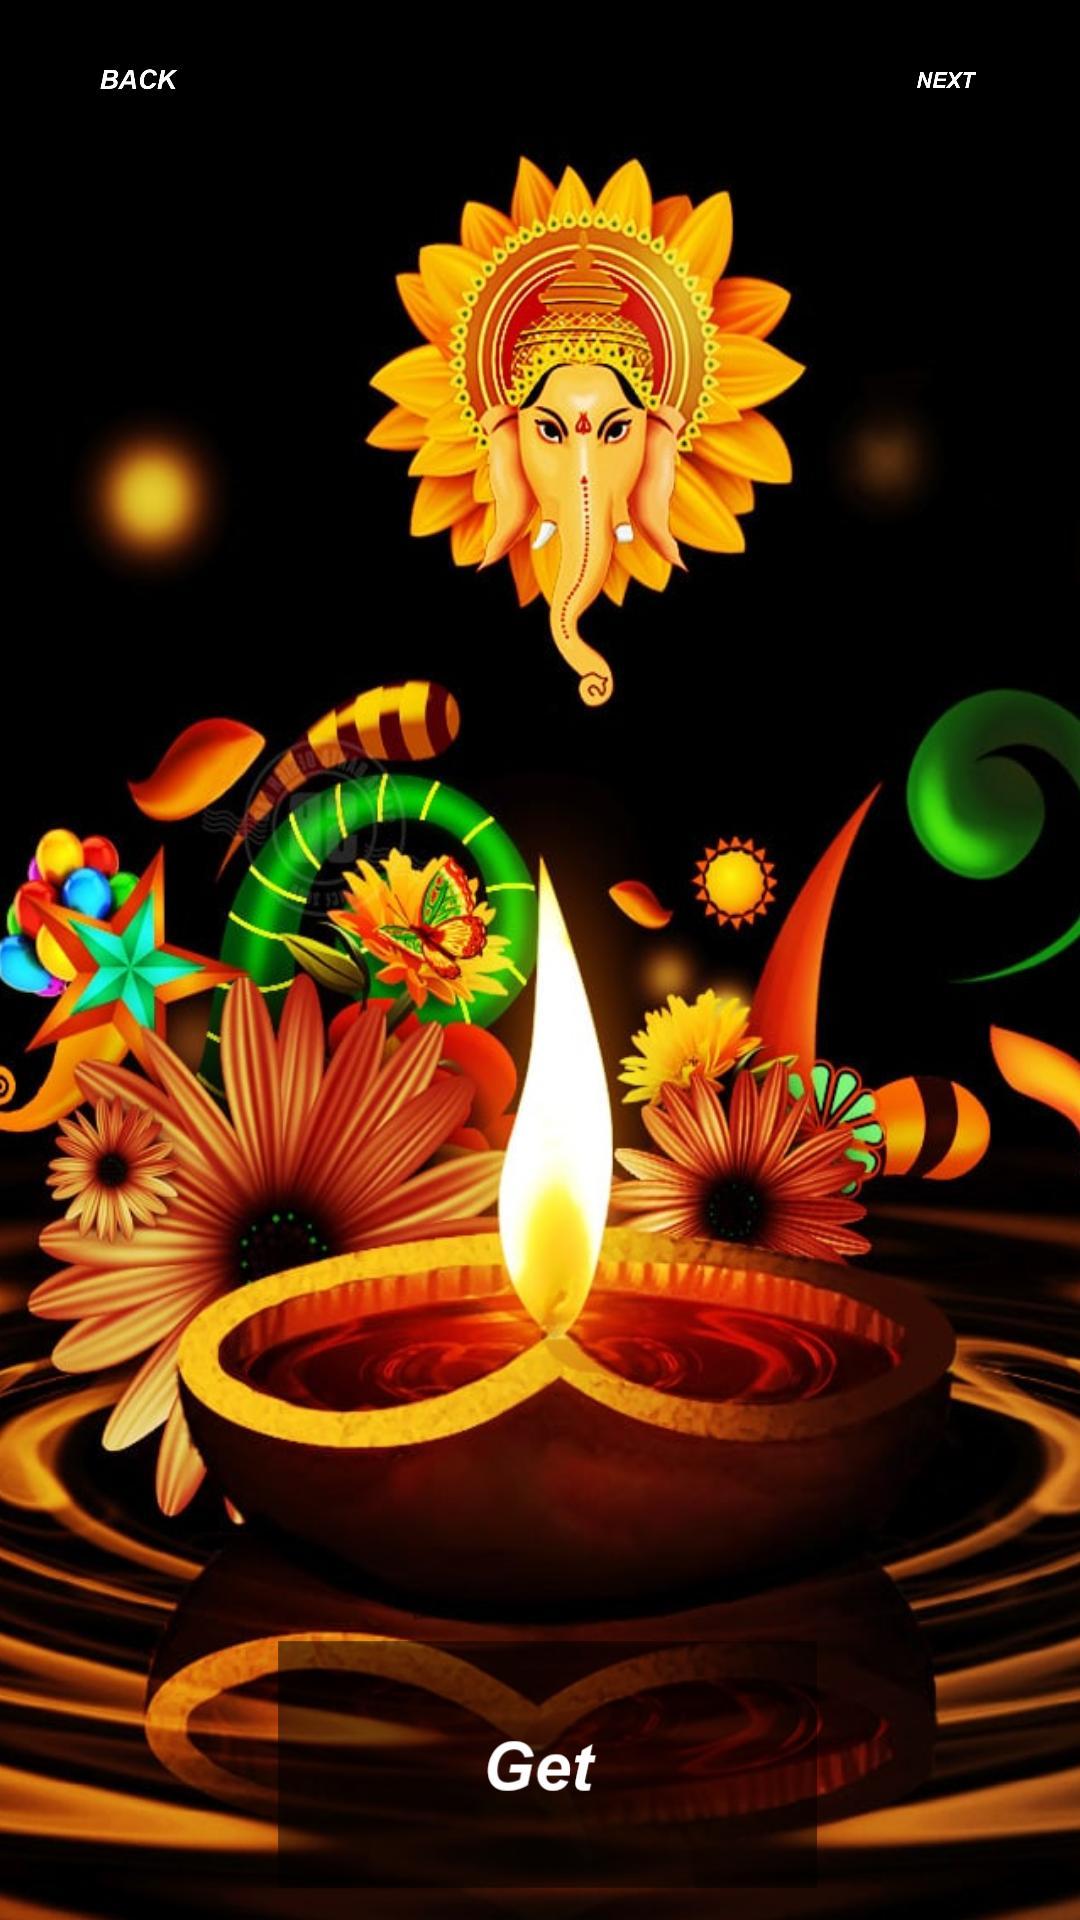 Diwali Wallpaper 2019 for Android